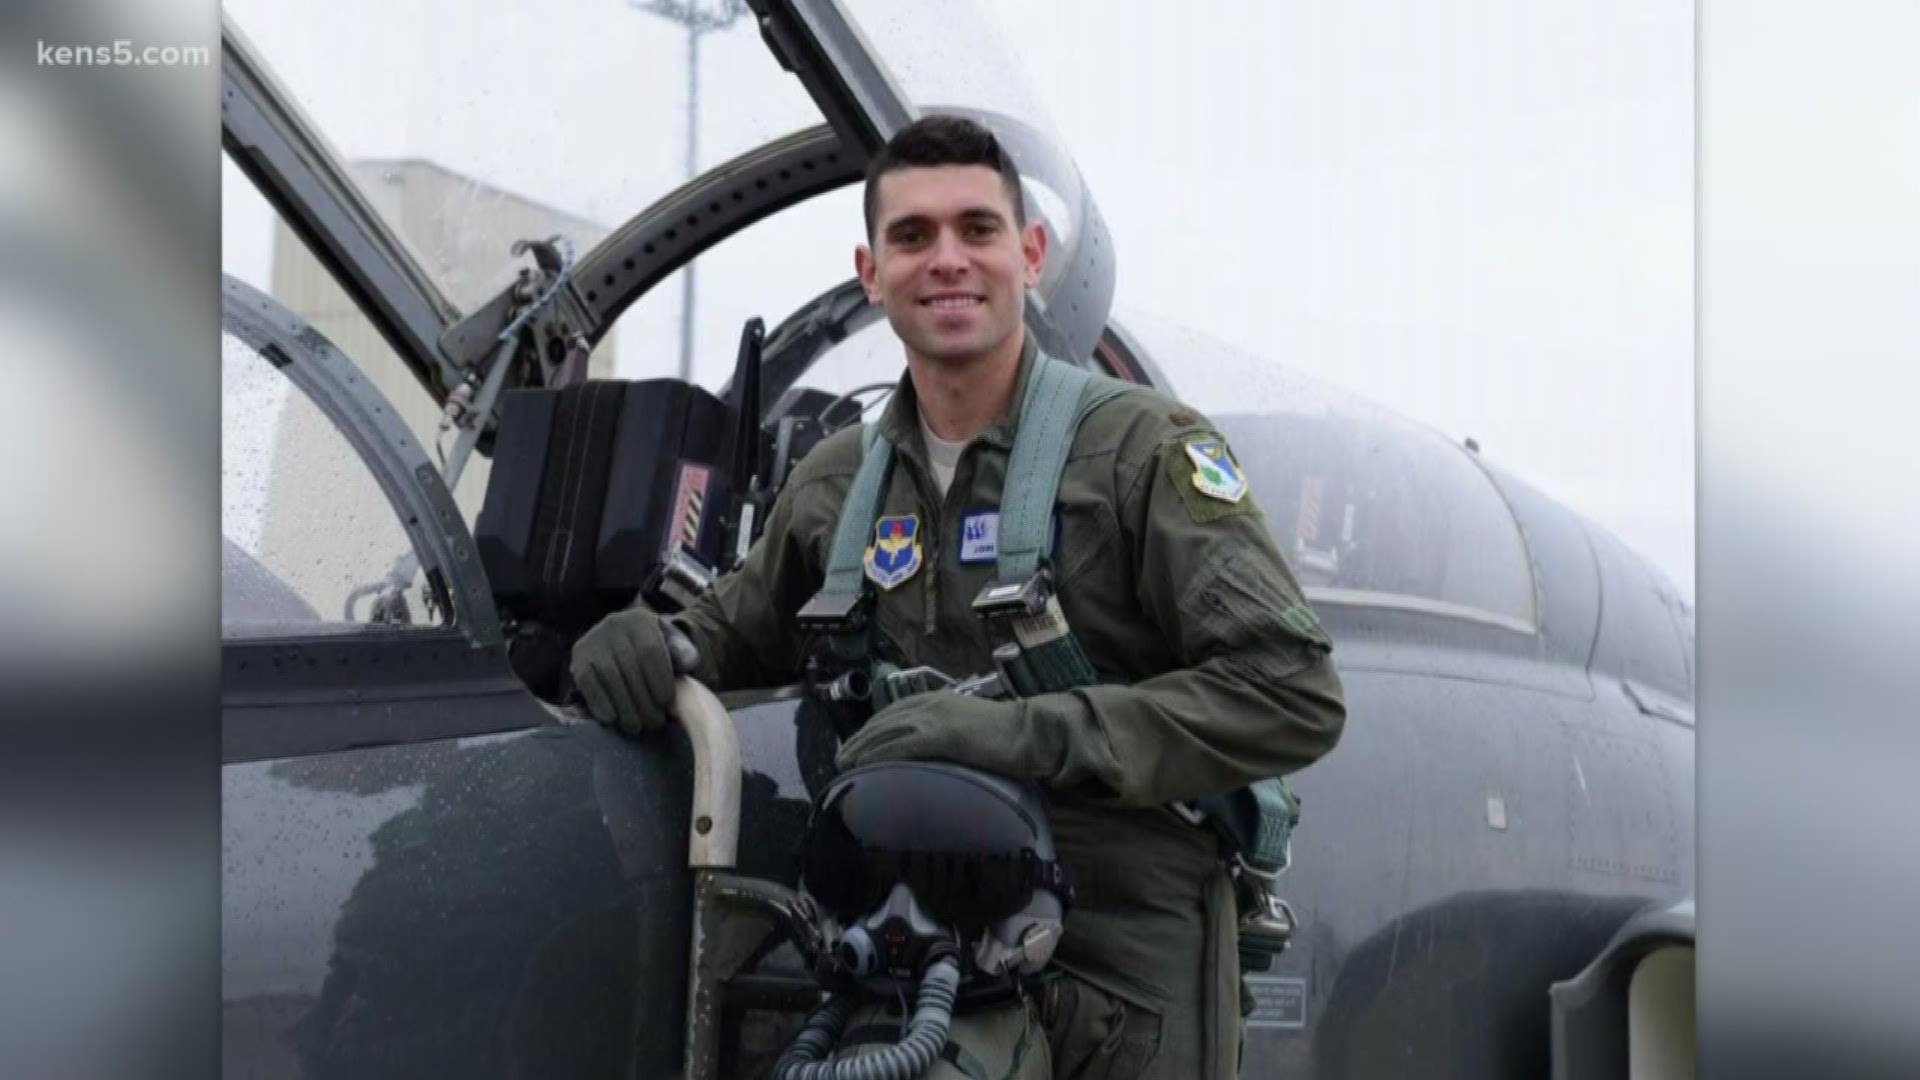 His comrades remembered him as an airman realizing his childhood dream.